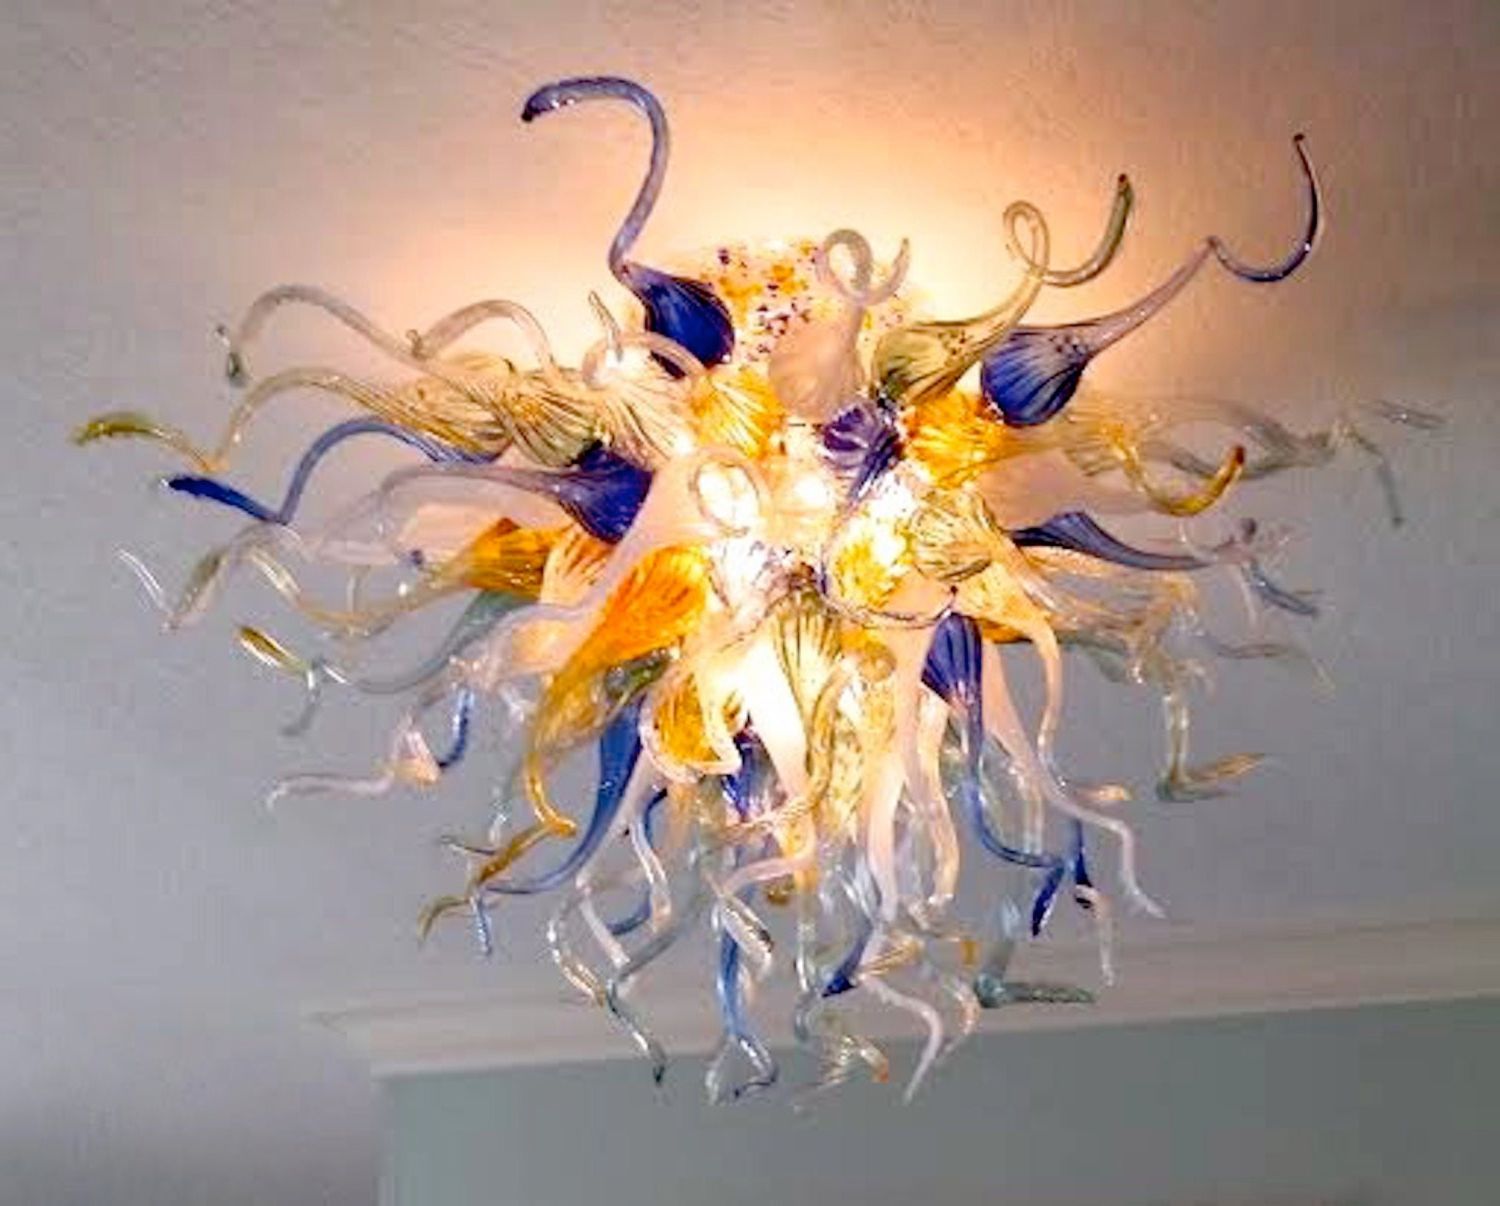 Art Glass Chandeliers Throughout Favorite Blown Glass Chandelier Lighting Art Glassprimolighting (View 5 of 15)